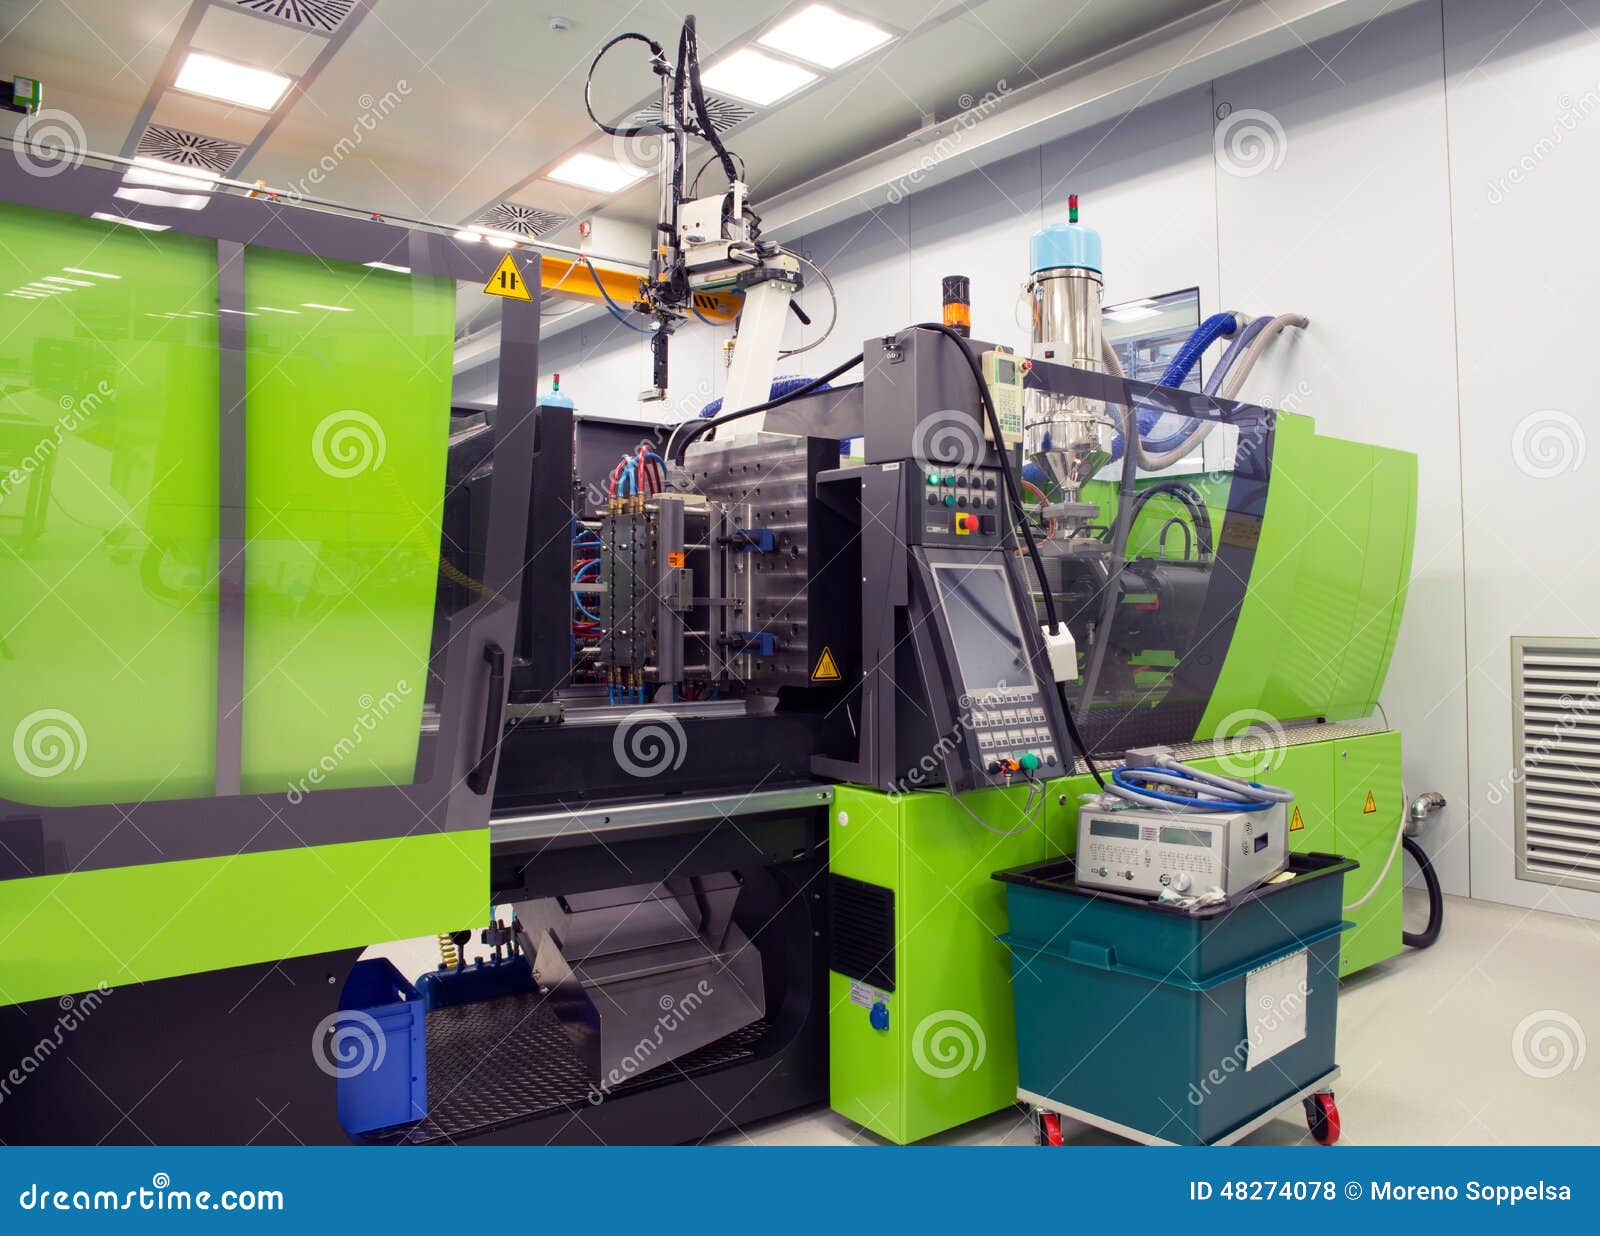 injection molding of biomedical products in clean room